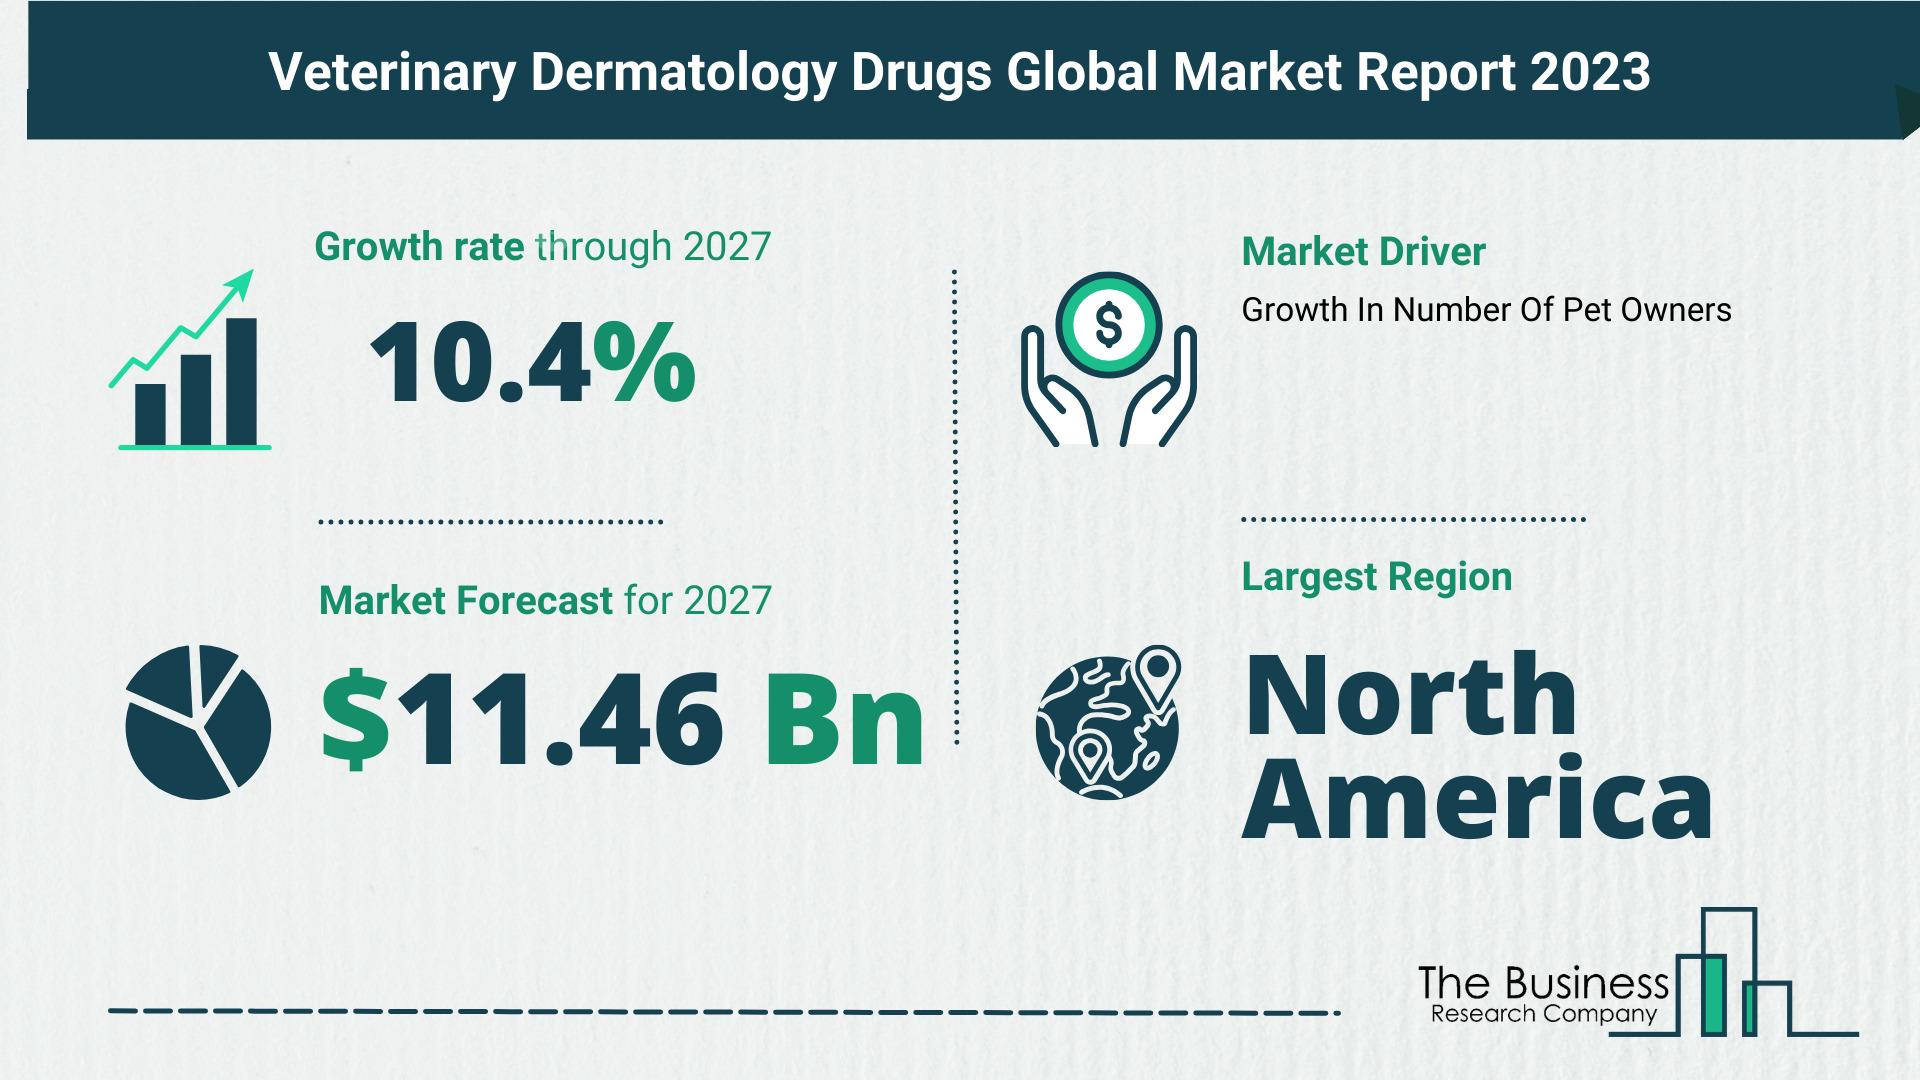 Overview Of The Veterinary Dermatology Drugs Market 2023: Size, Drivers, And Trends